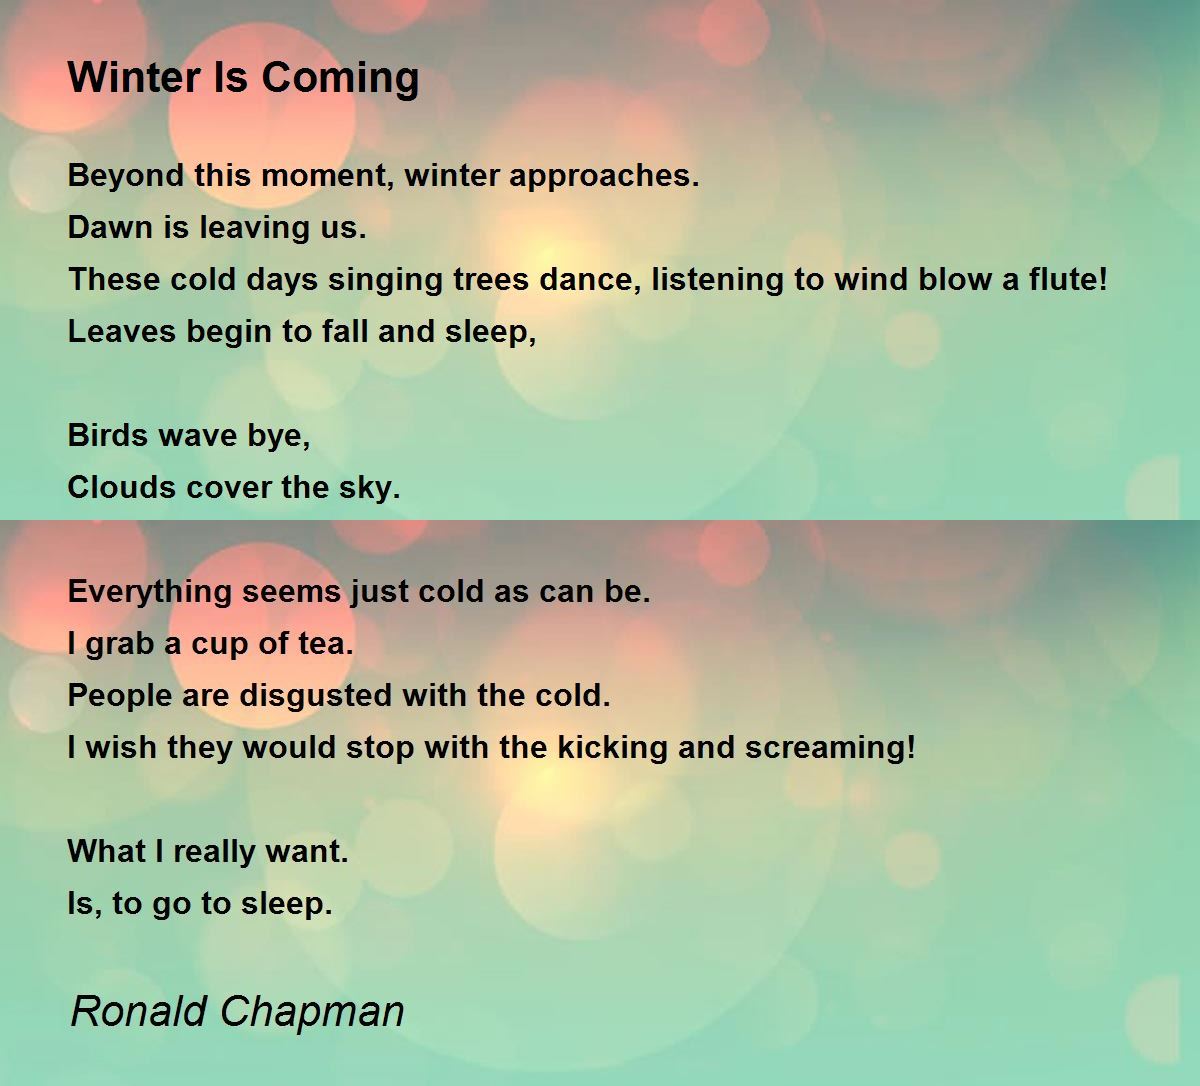 poetry essay on this winter coming